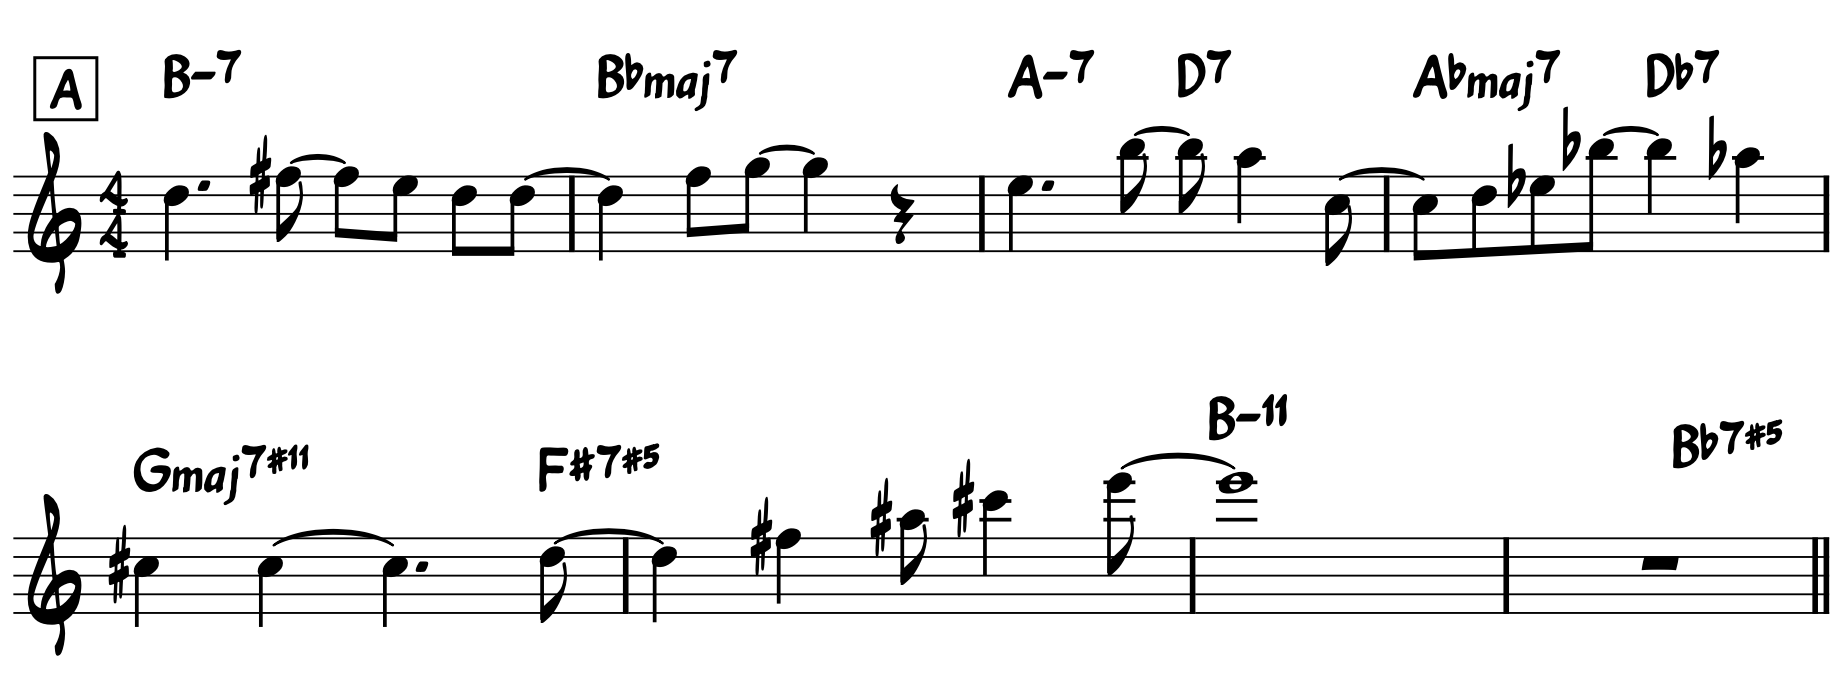 Lead Sheet Jazz tutorial: Well formatted lead sheet where chord symbols are large enough.